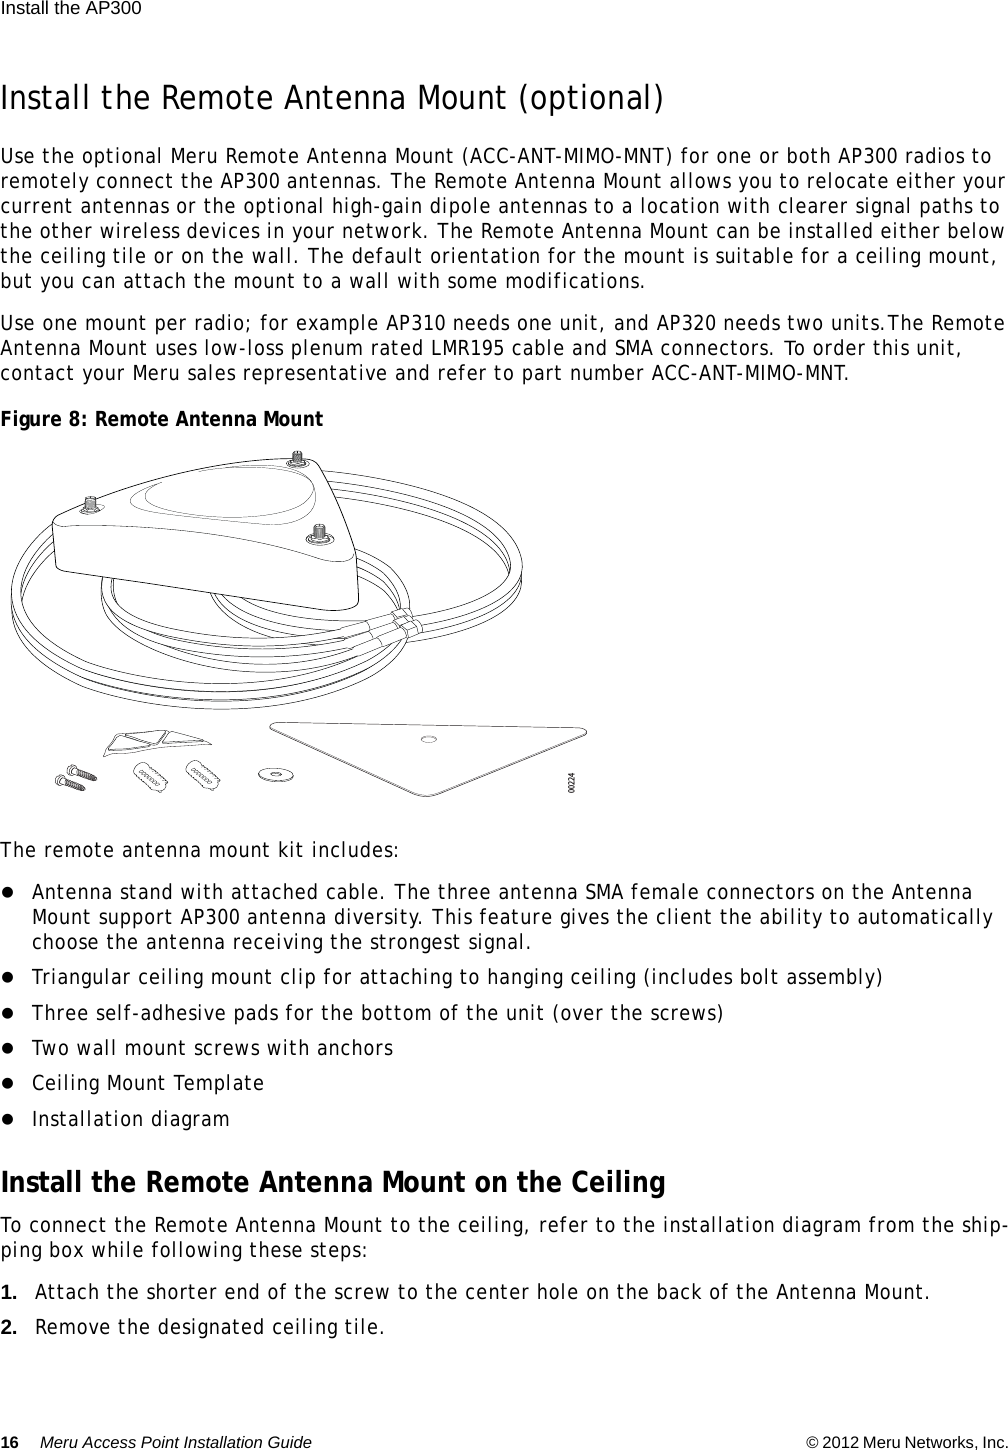 16 Meru Access Point Installation Guide © 2012 Meru Networks, Inc. Install the AP300  Install the Remote Antenna Mount (optional)Use the optional Meru Remote Antenna Mount (ACC-ANT-MIMO-MNT) for one or both AP300 radios to remotely connect the AP300 antennas. The Remote Antenna Mount allows you to relocate either your current antennas or the optional high-gain dipole antennas to a location with clearer signal paths to the other wireless devices in your network. The Remote Antenna Mount can be installed either below the ceiling tile or on the wall. The default orientation for the mount is suitable for a ceiling mount, but you can attach the mount to a wall with some modifications.Use one mount per radio; for example AP310 needs one unit, and AP320 needs two units.The Remote Antenna Mount uses low-loss plenum rated LMR195 cable and SMA connectors. To order this unit, contact your Meru sales representative and refer to part number ACC-ANT-MIMO-MNT.Figure 8: Remote Antenna MountThe remote antenna mount kit includes:Antenna stand with attached cable. The three antenna SMA female connectors on the Antenna Mount support AP300 antenna diversity. This feature gives the client the ability to automatically choose the antenna receiving the strongest signal. Triangular ceiling mount clip for attaching to hanging ceiling (includes bolt assembly) Three self-adhesive pads for the bottom of the unit (over the screws)Two wall mount screws with anchorsCeiling Mount TemplateInstallation diagramInstall the Remote Antenna Mount on the CeilingTo connect the Remote Antenna Mount to the ceiling, refer to the installation diagram from the ship-ping box while following these steps:1. Attach the shorter end of the screw to the center hole on the back of the Antenna Mount.2. Remove the designated ceiling tile.00224